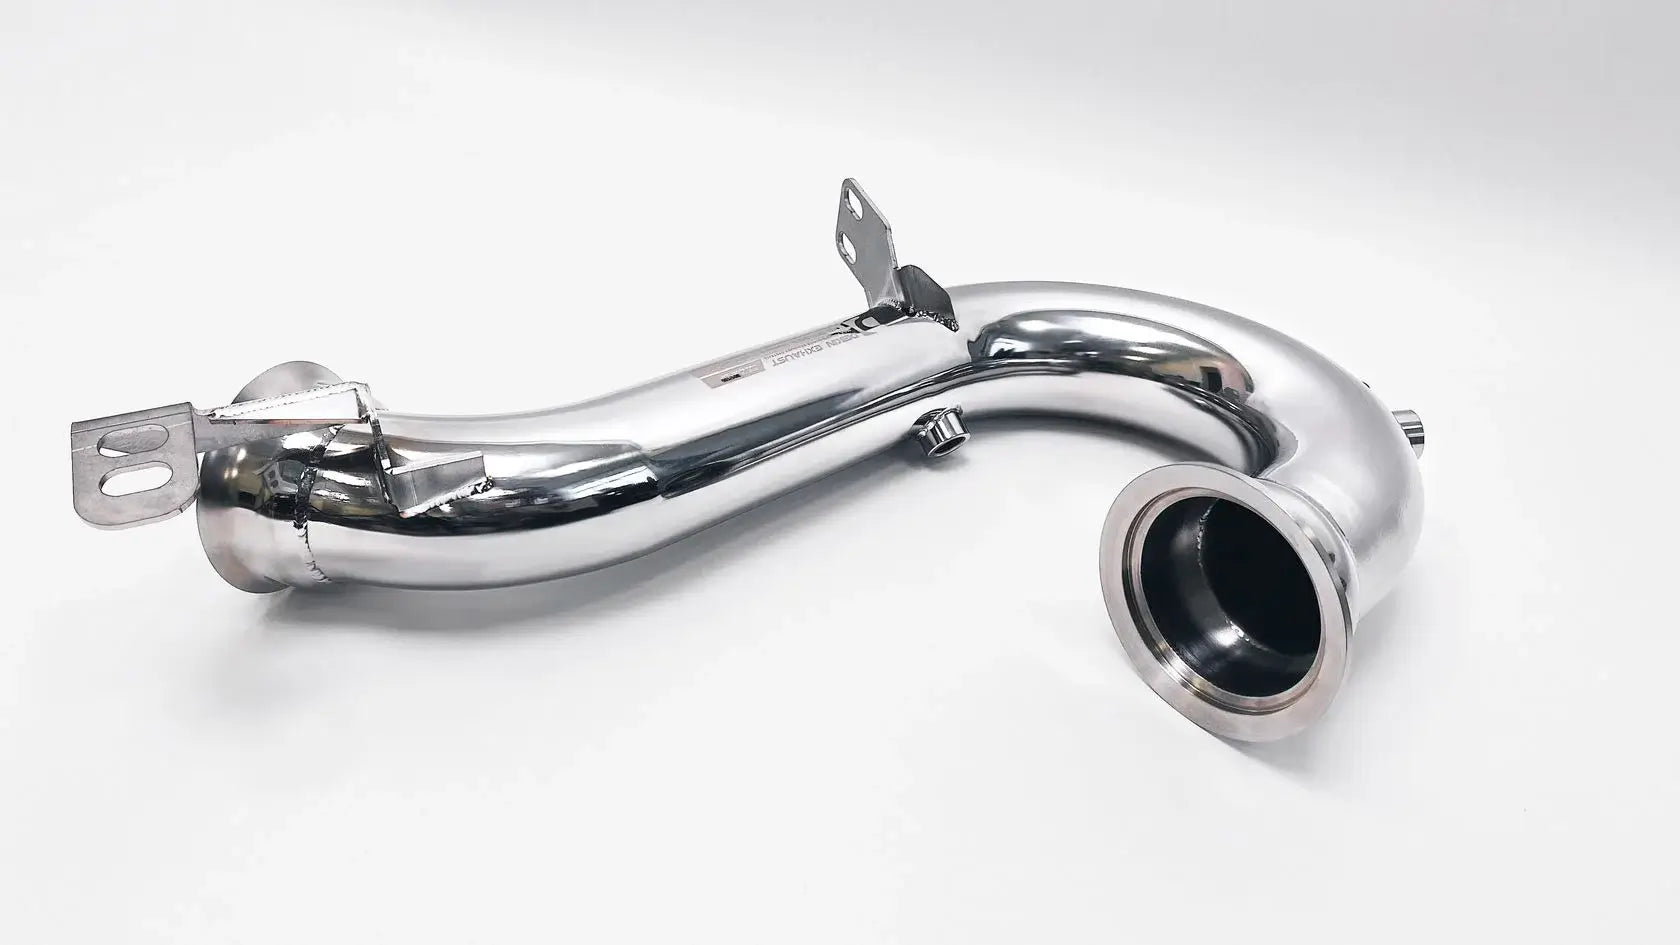 DEIKIN 10-MB.GT53.X290-DP Downpipe for Mercedes-AMG GT53 (x290) without HeatShield Photo-1 